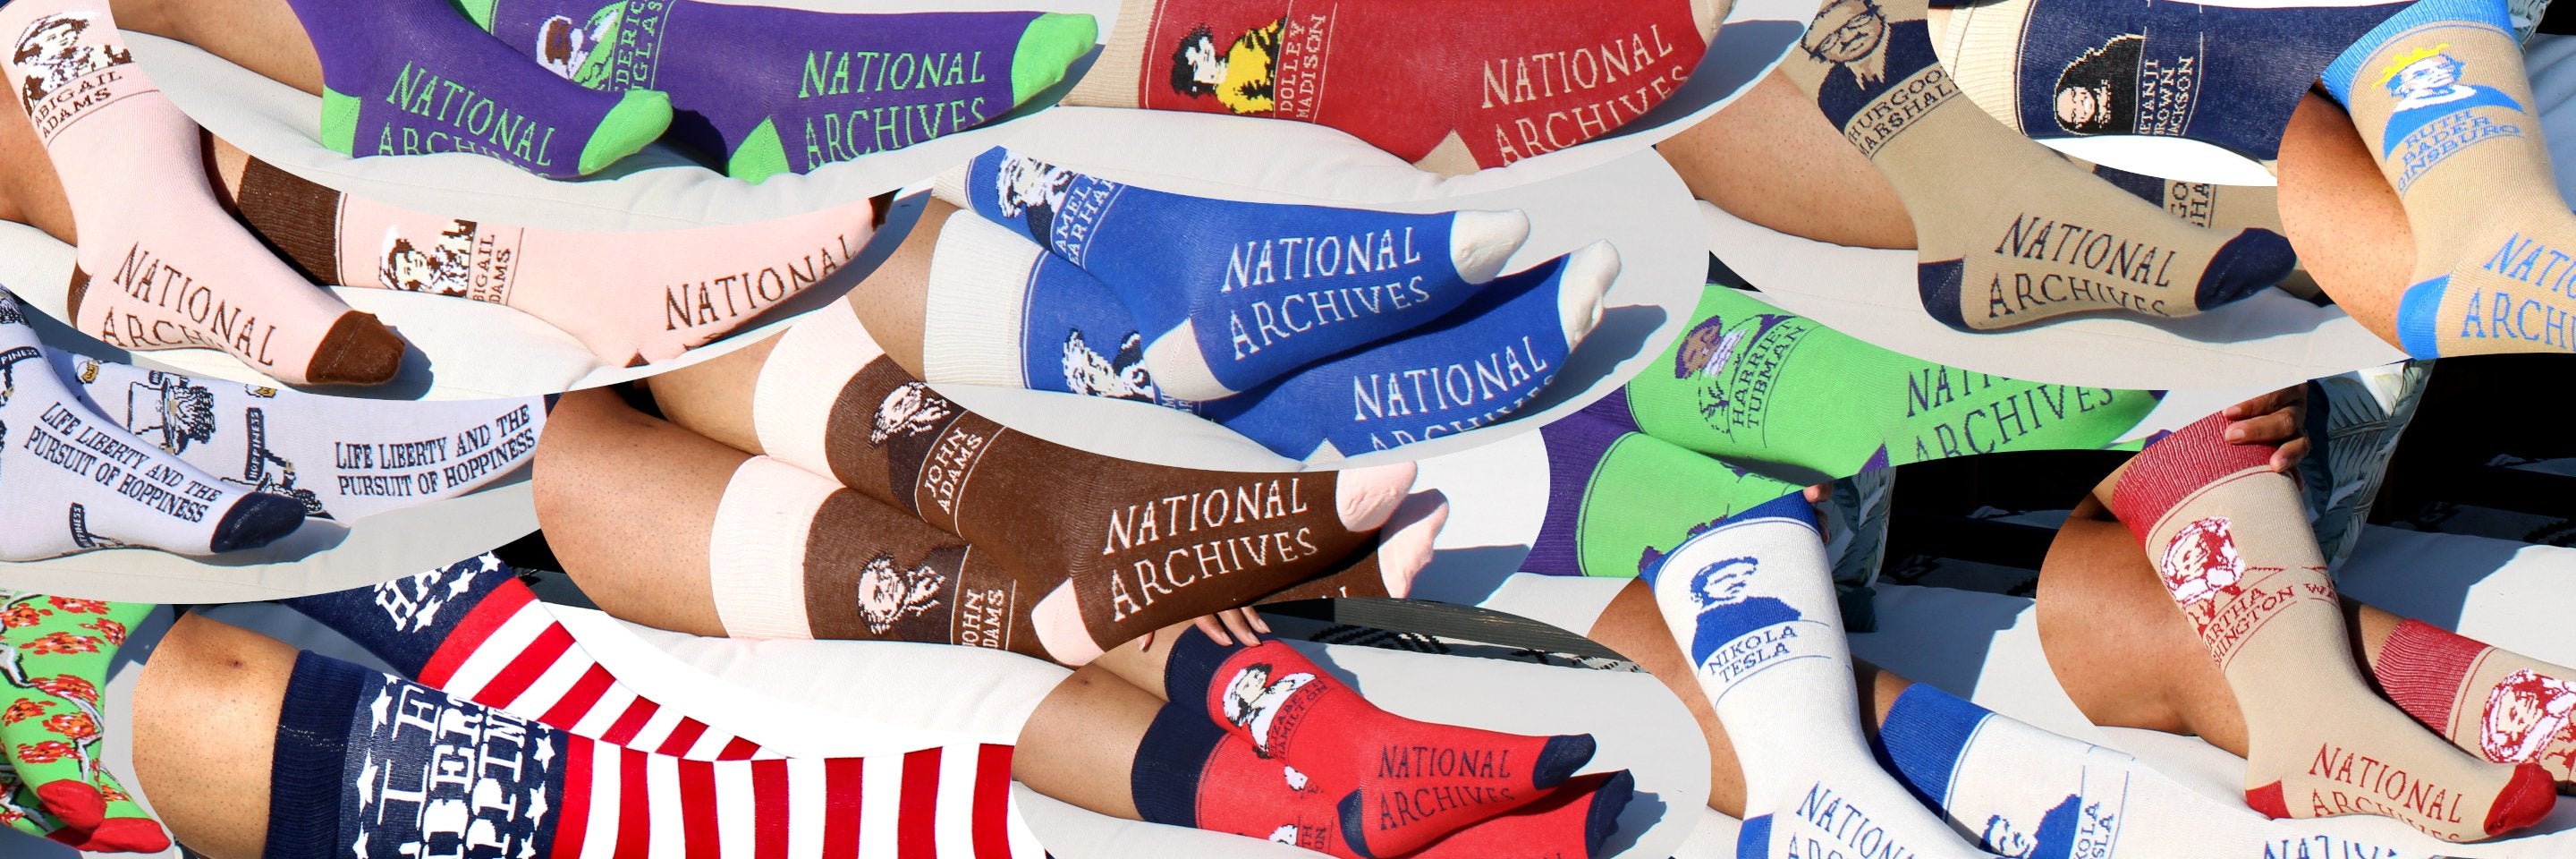 National Archives - Select Sports Souvenirs